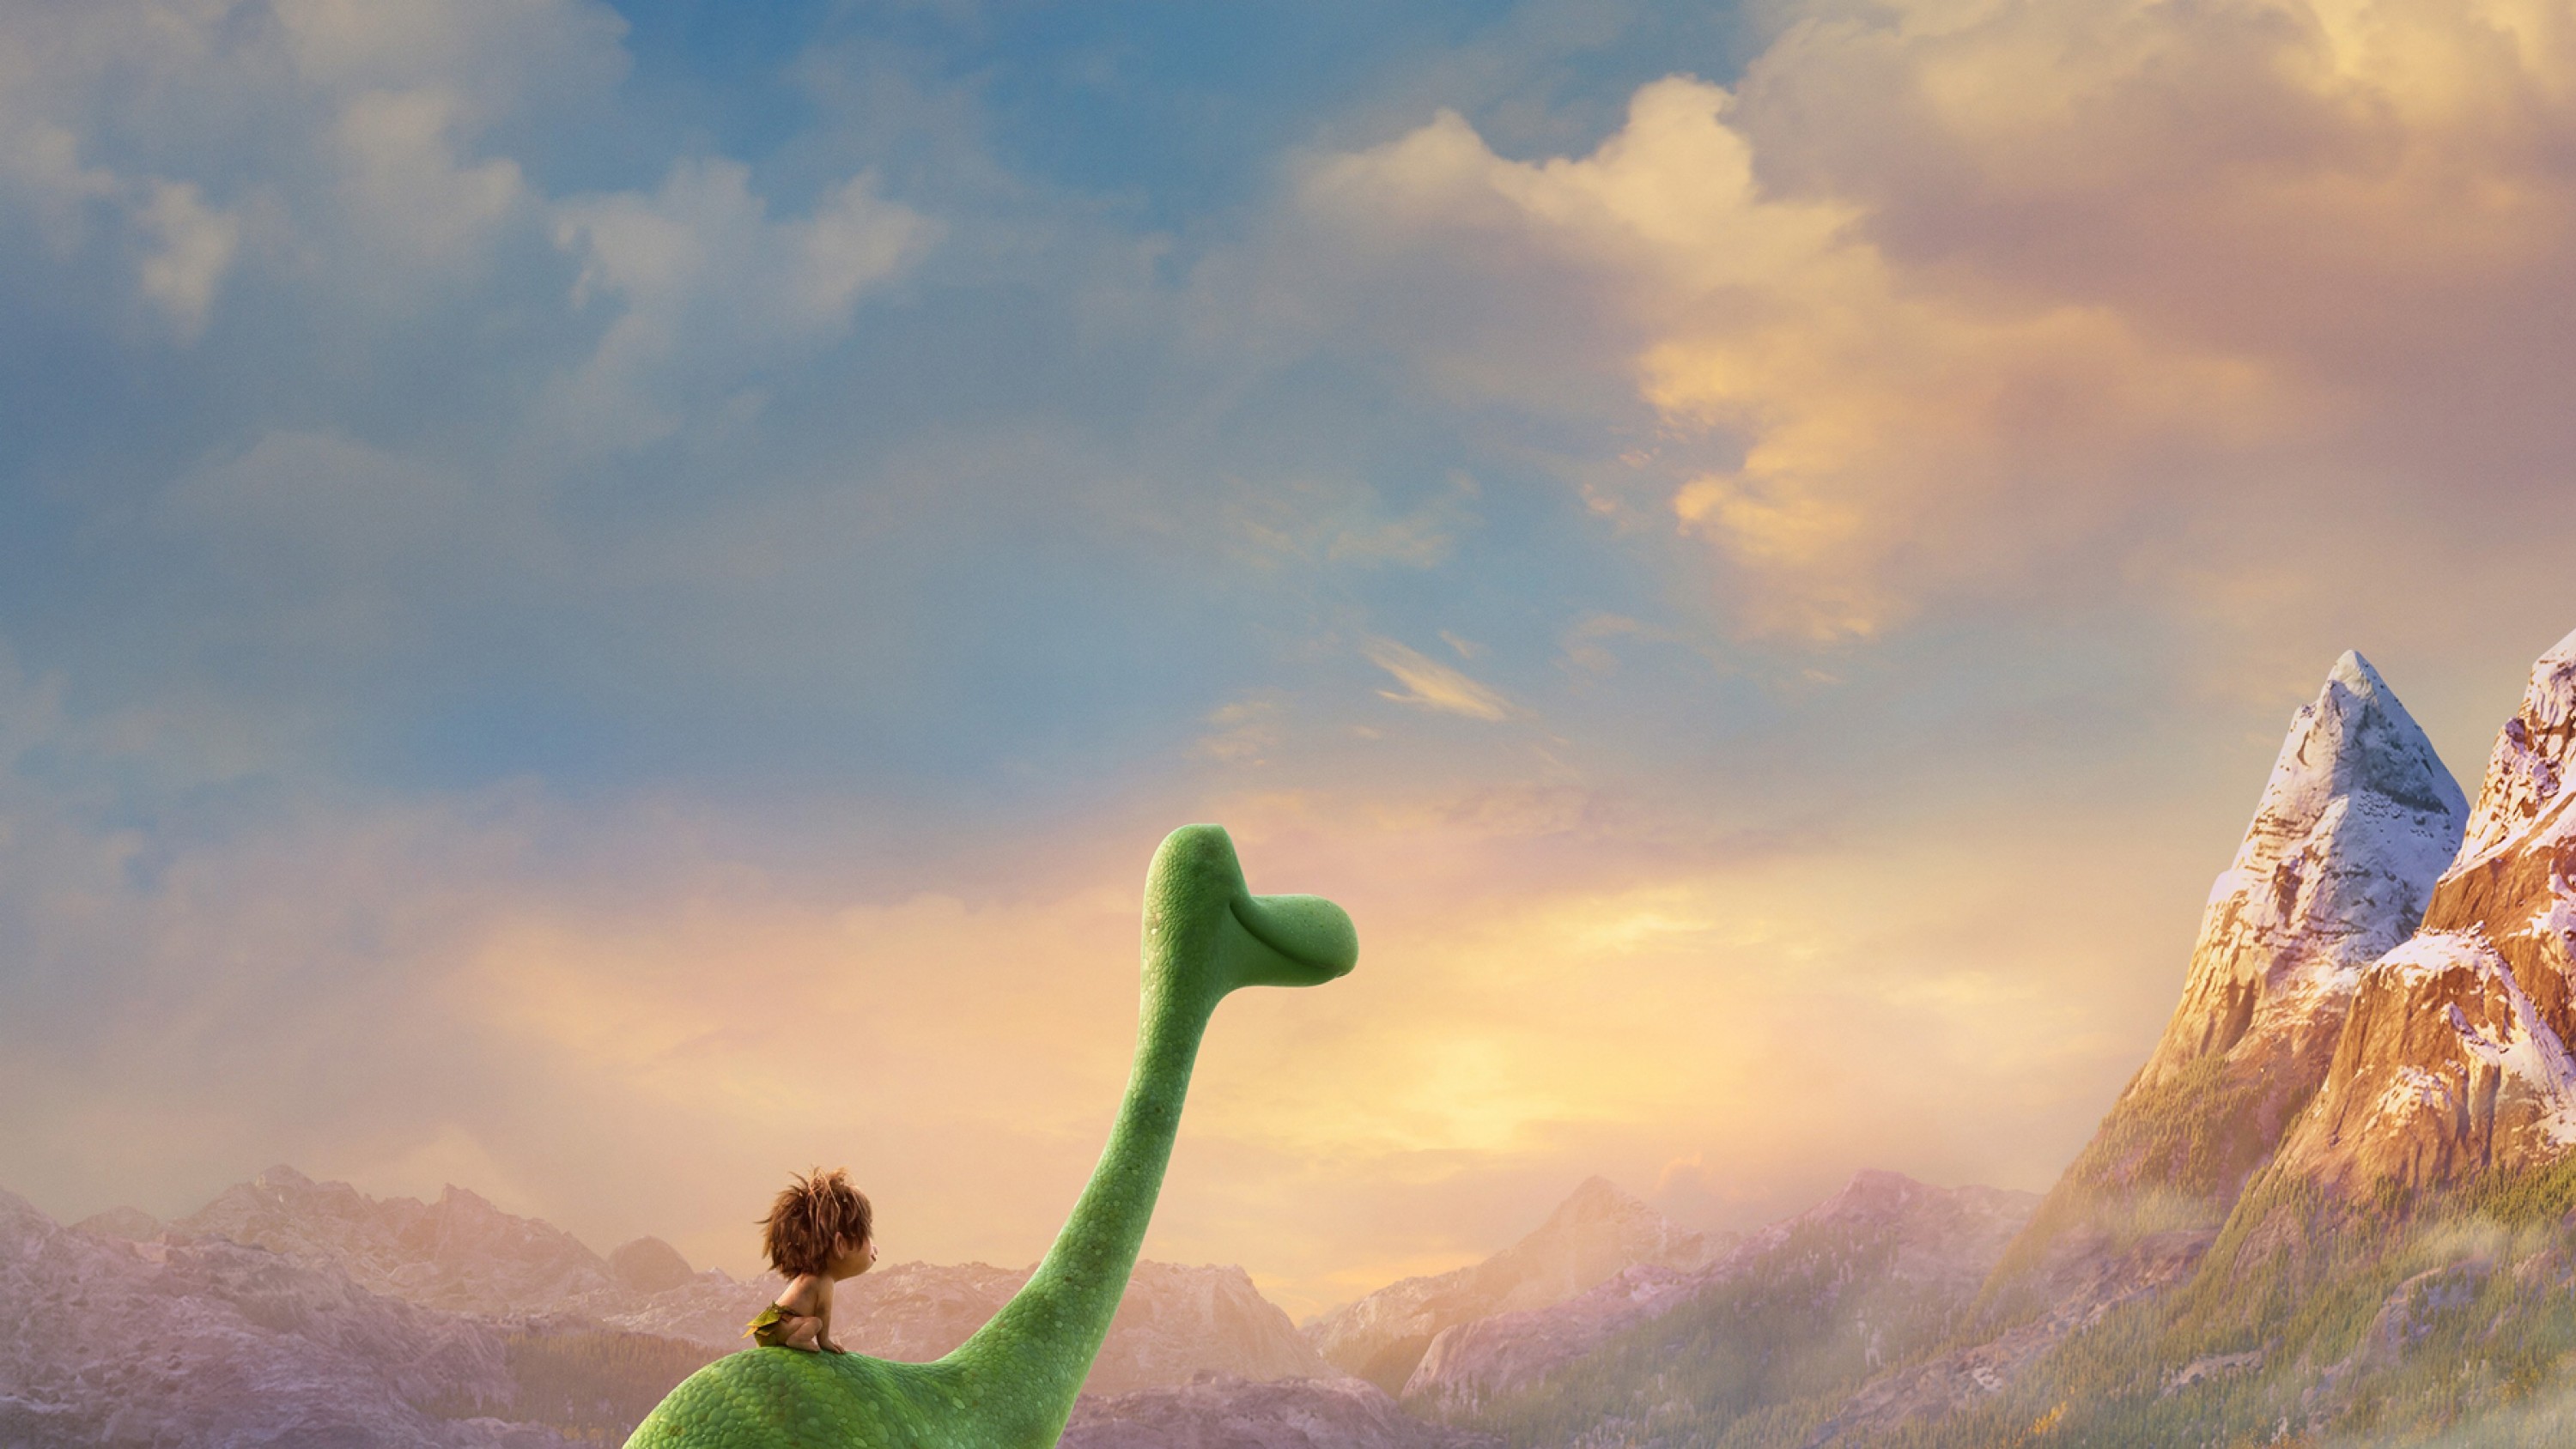 Resource - The Good Dinosaur: Film Guide - Into Film